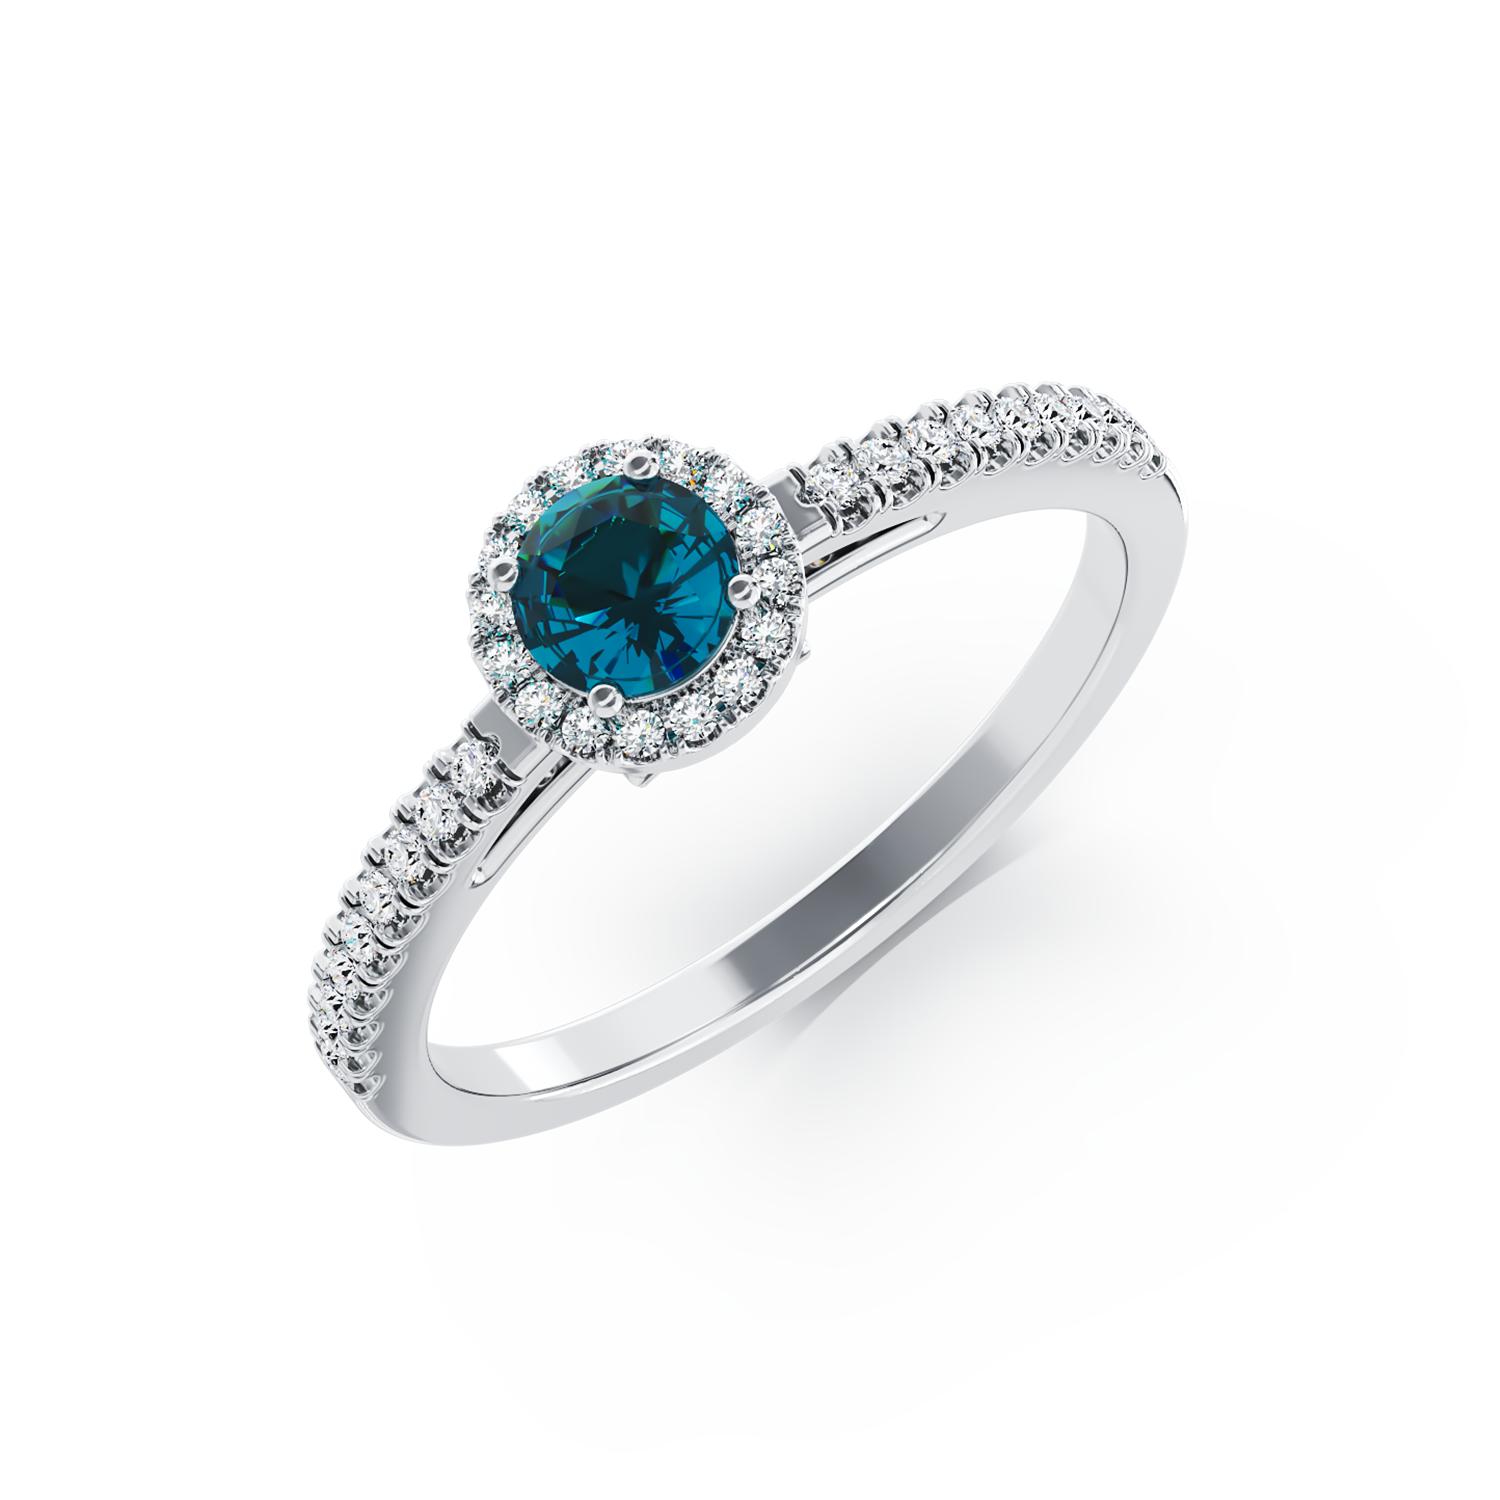 18K white gold engagement ring with 0.32ct blue diamond and 0.2ct diamonds